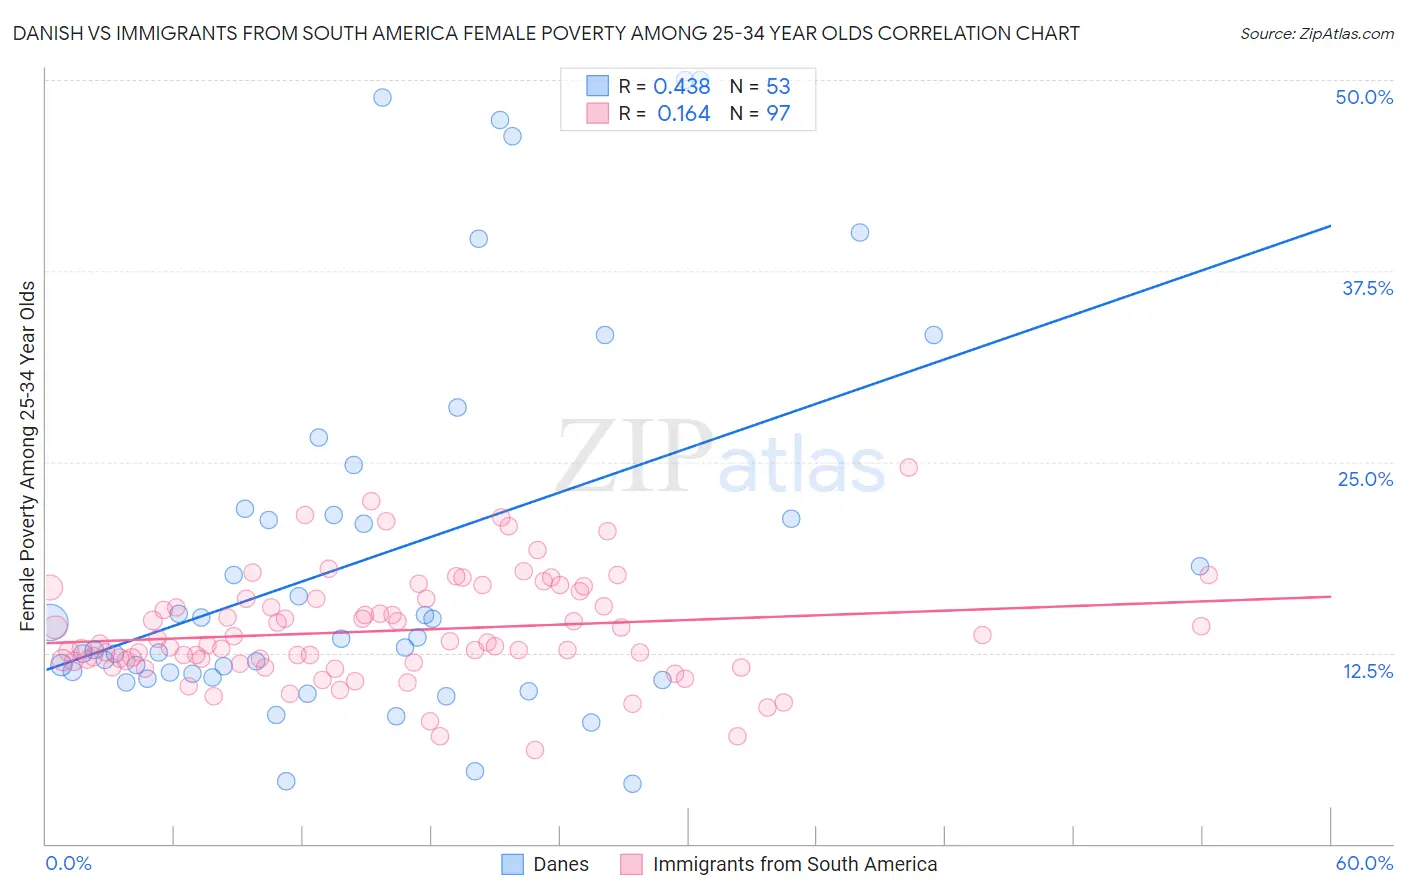 Danish vs Immigrants from South America Female Poverty Among 25-34 Year Olds